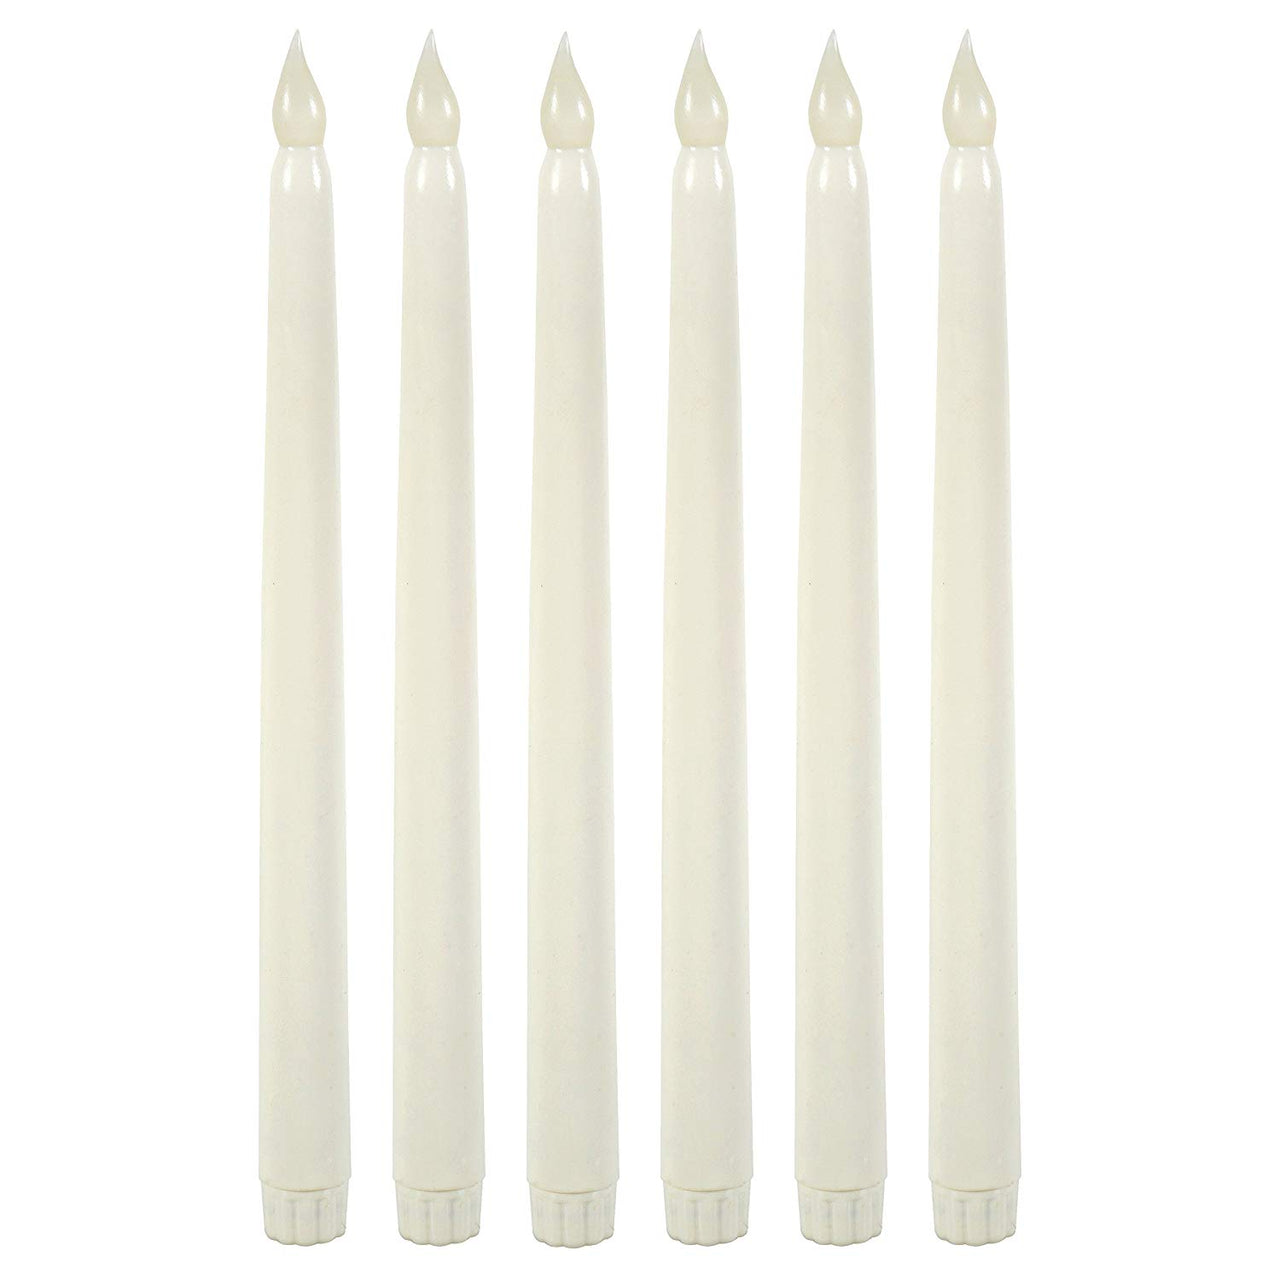 11" Ivory Taper Flameless LED Faux Wax Candle Lights 6 Pack - West Ivory LED Lighting 